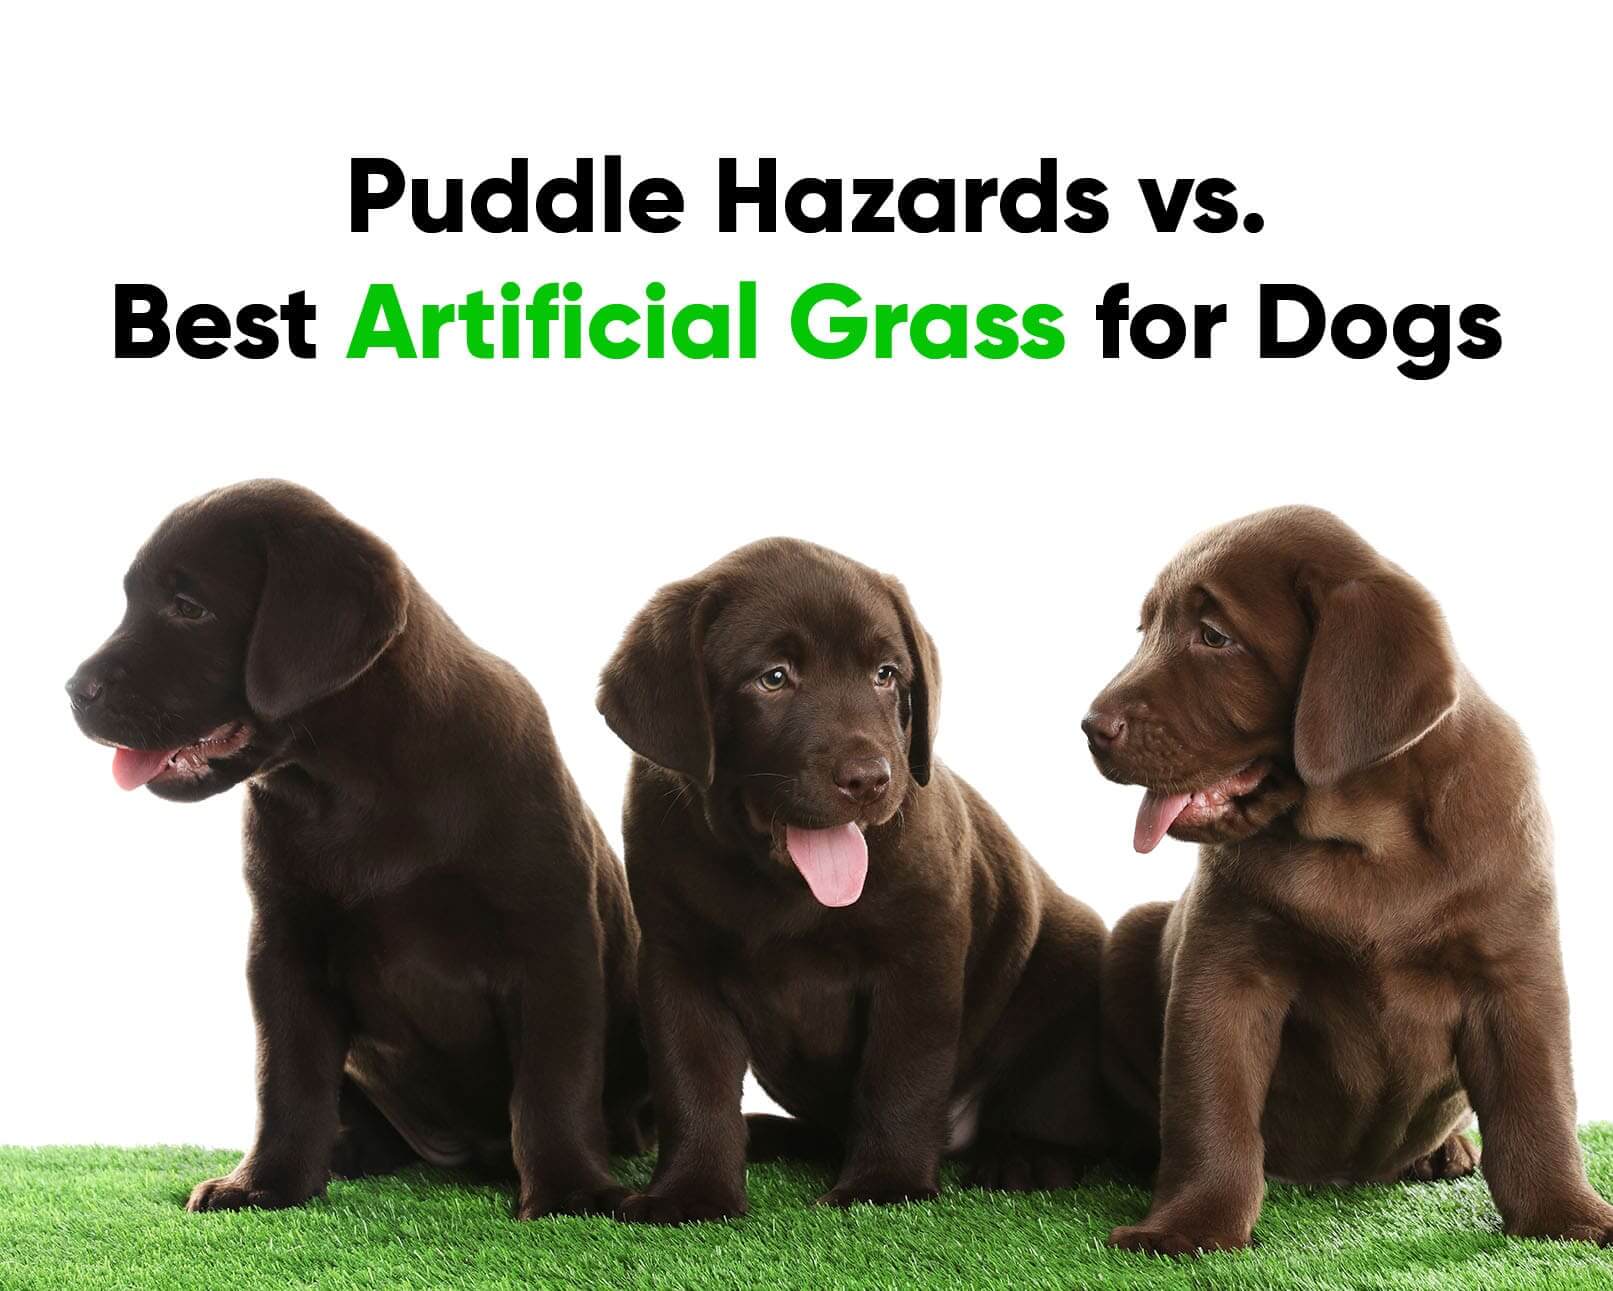 Puddle Hazards vs. Best Artificial Grass for Dogs in Boston